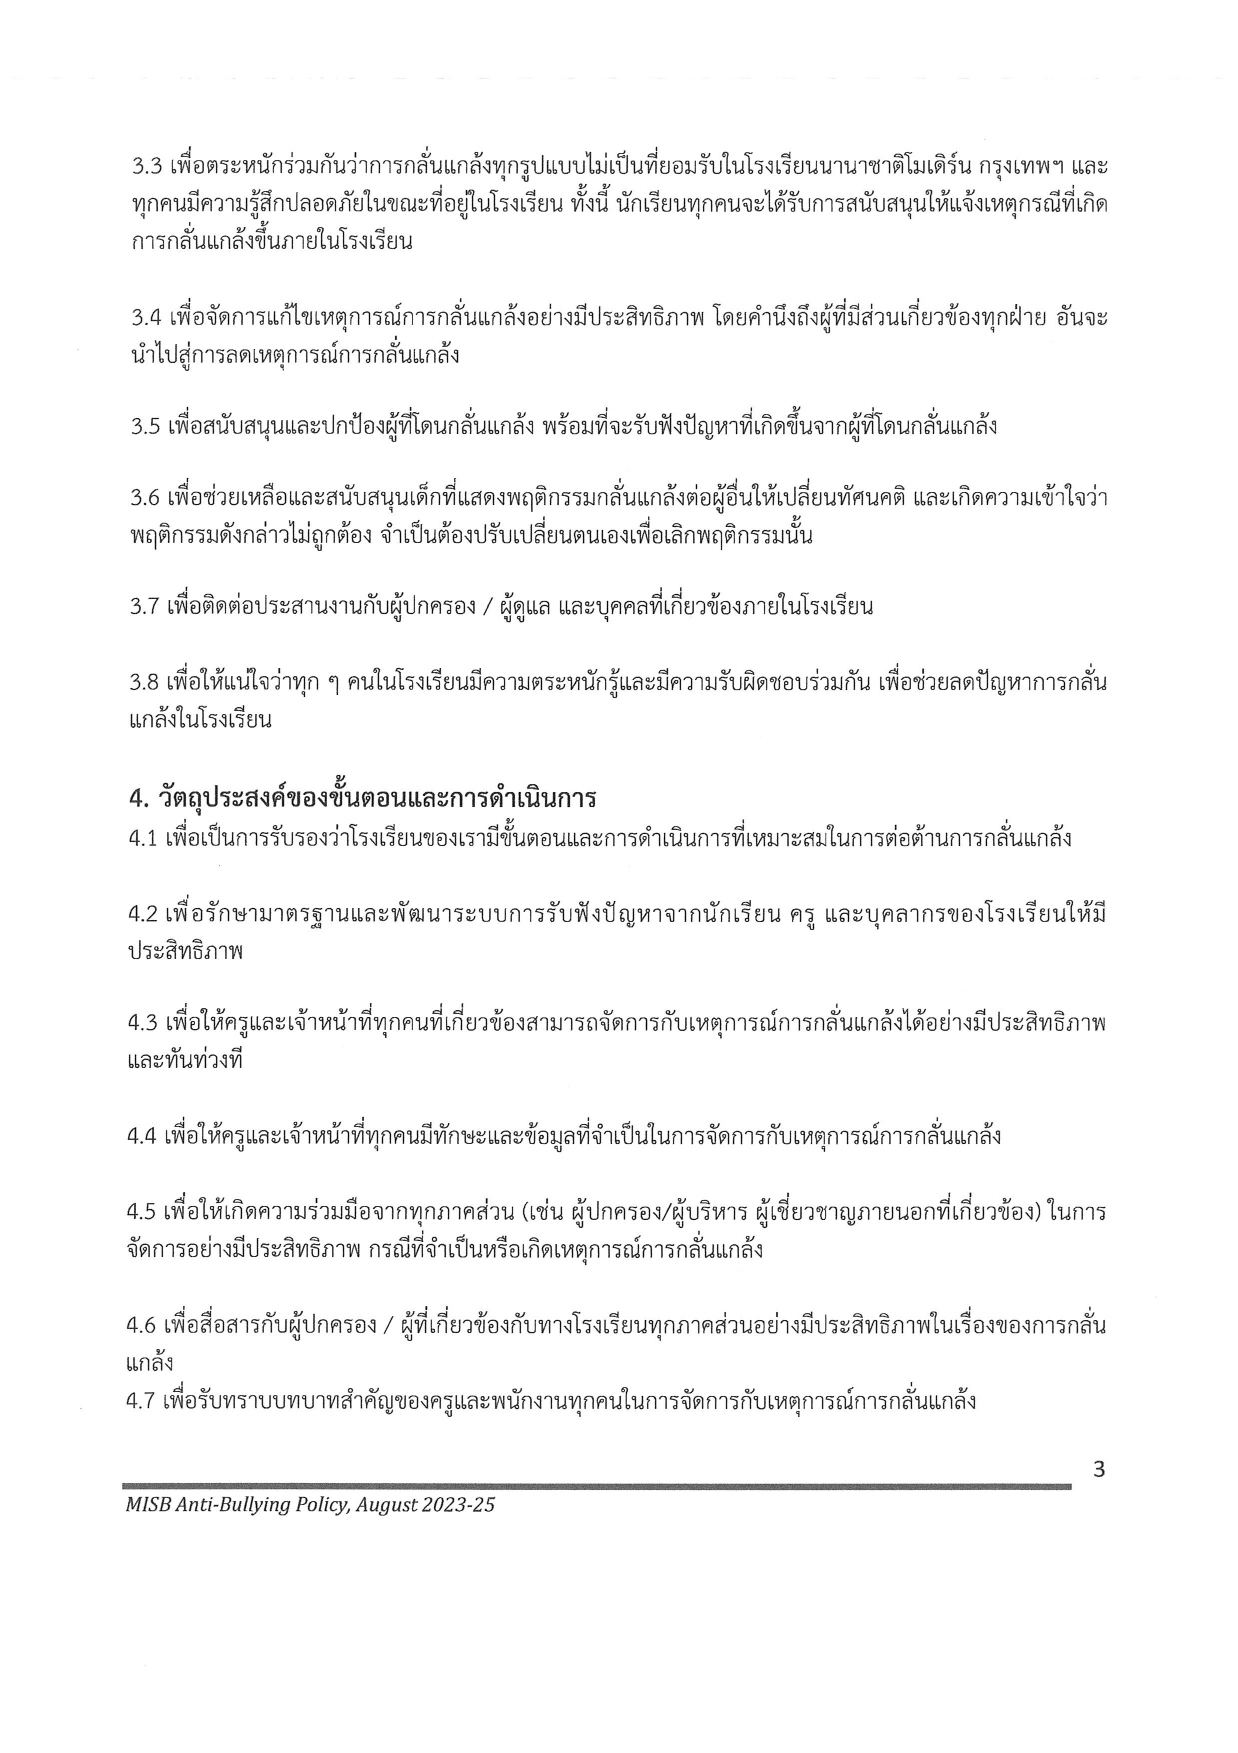 Anti Bullying Policy 2023 2025 Thai page 0005